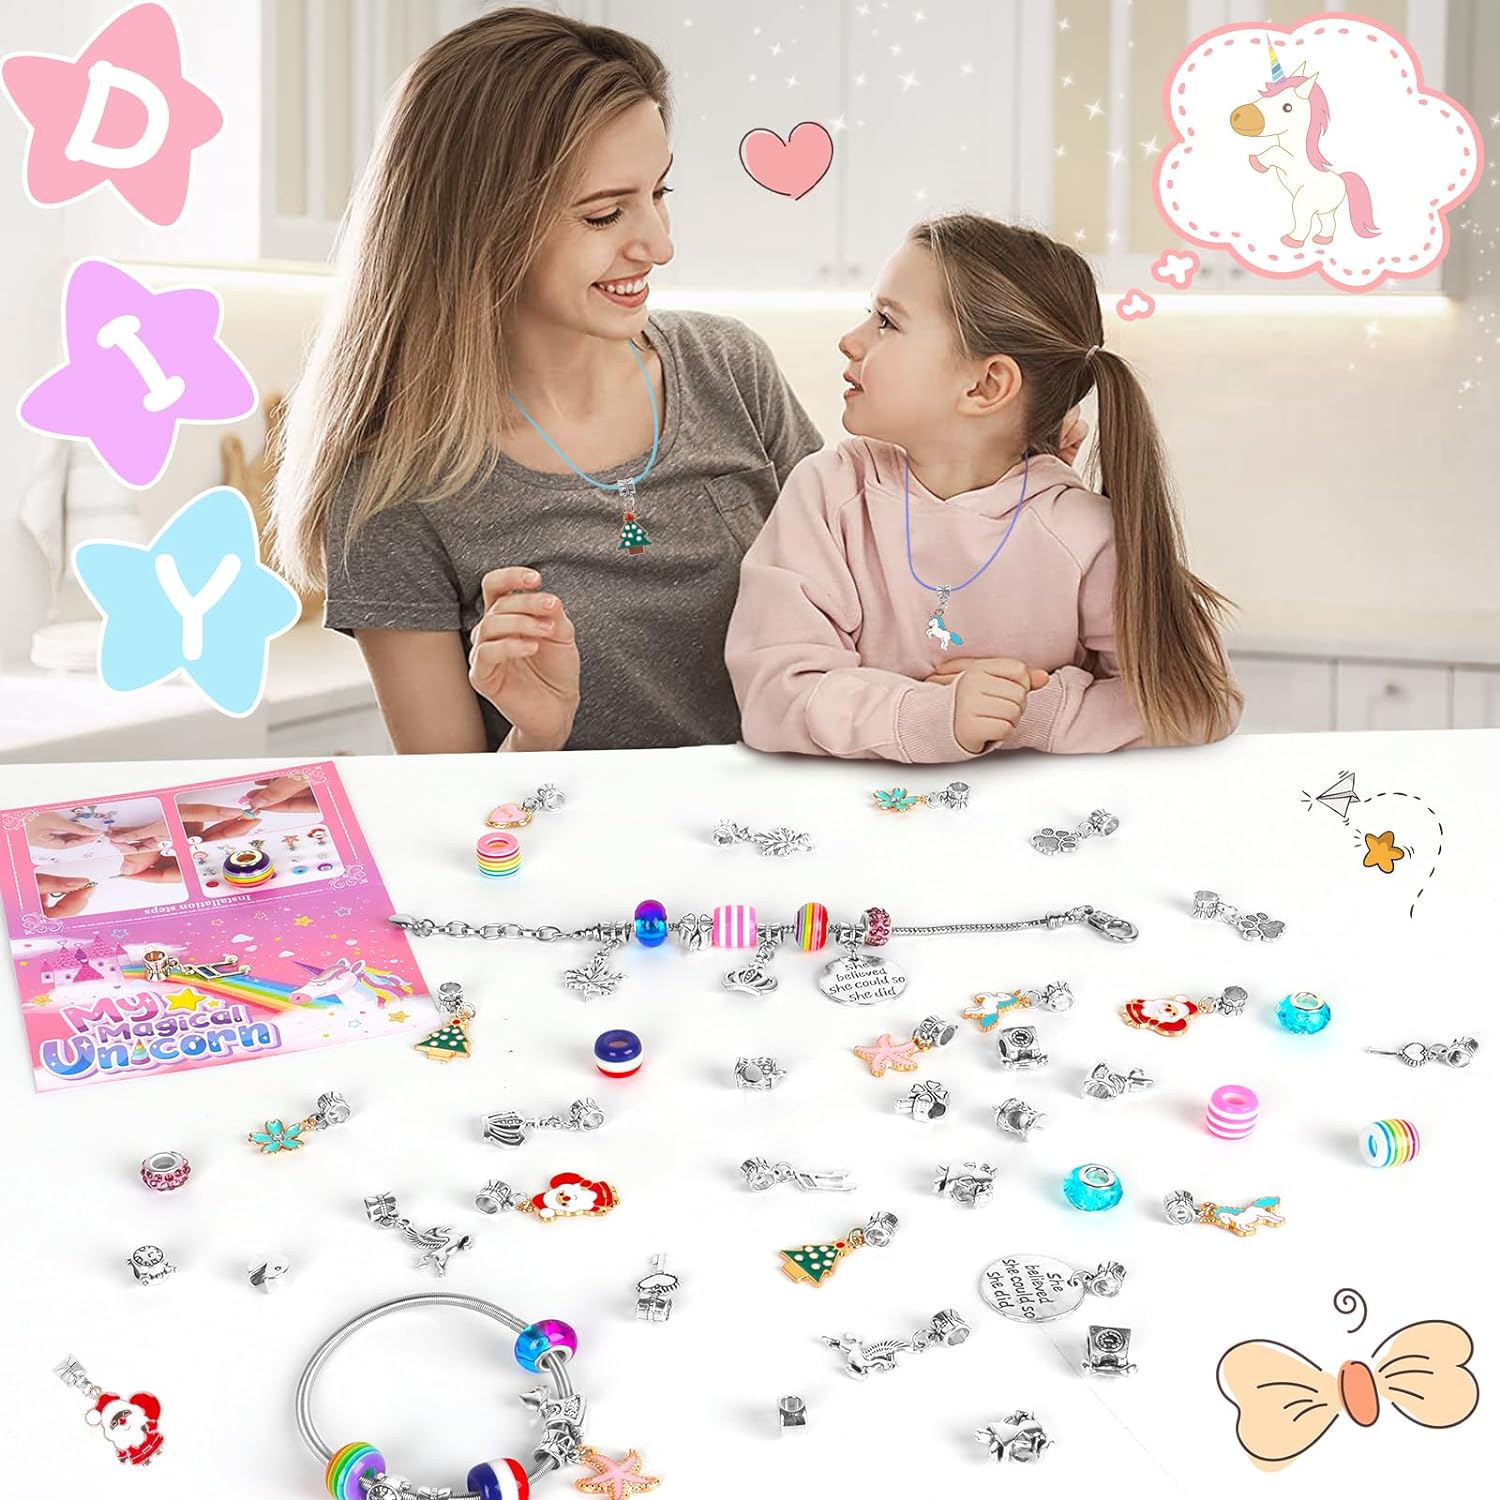 You are currently viewing HYASIA Unicorn Gifts for Girls Jewelry Making Kit Review